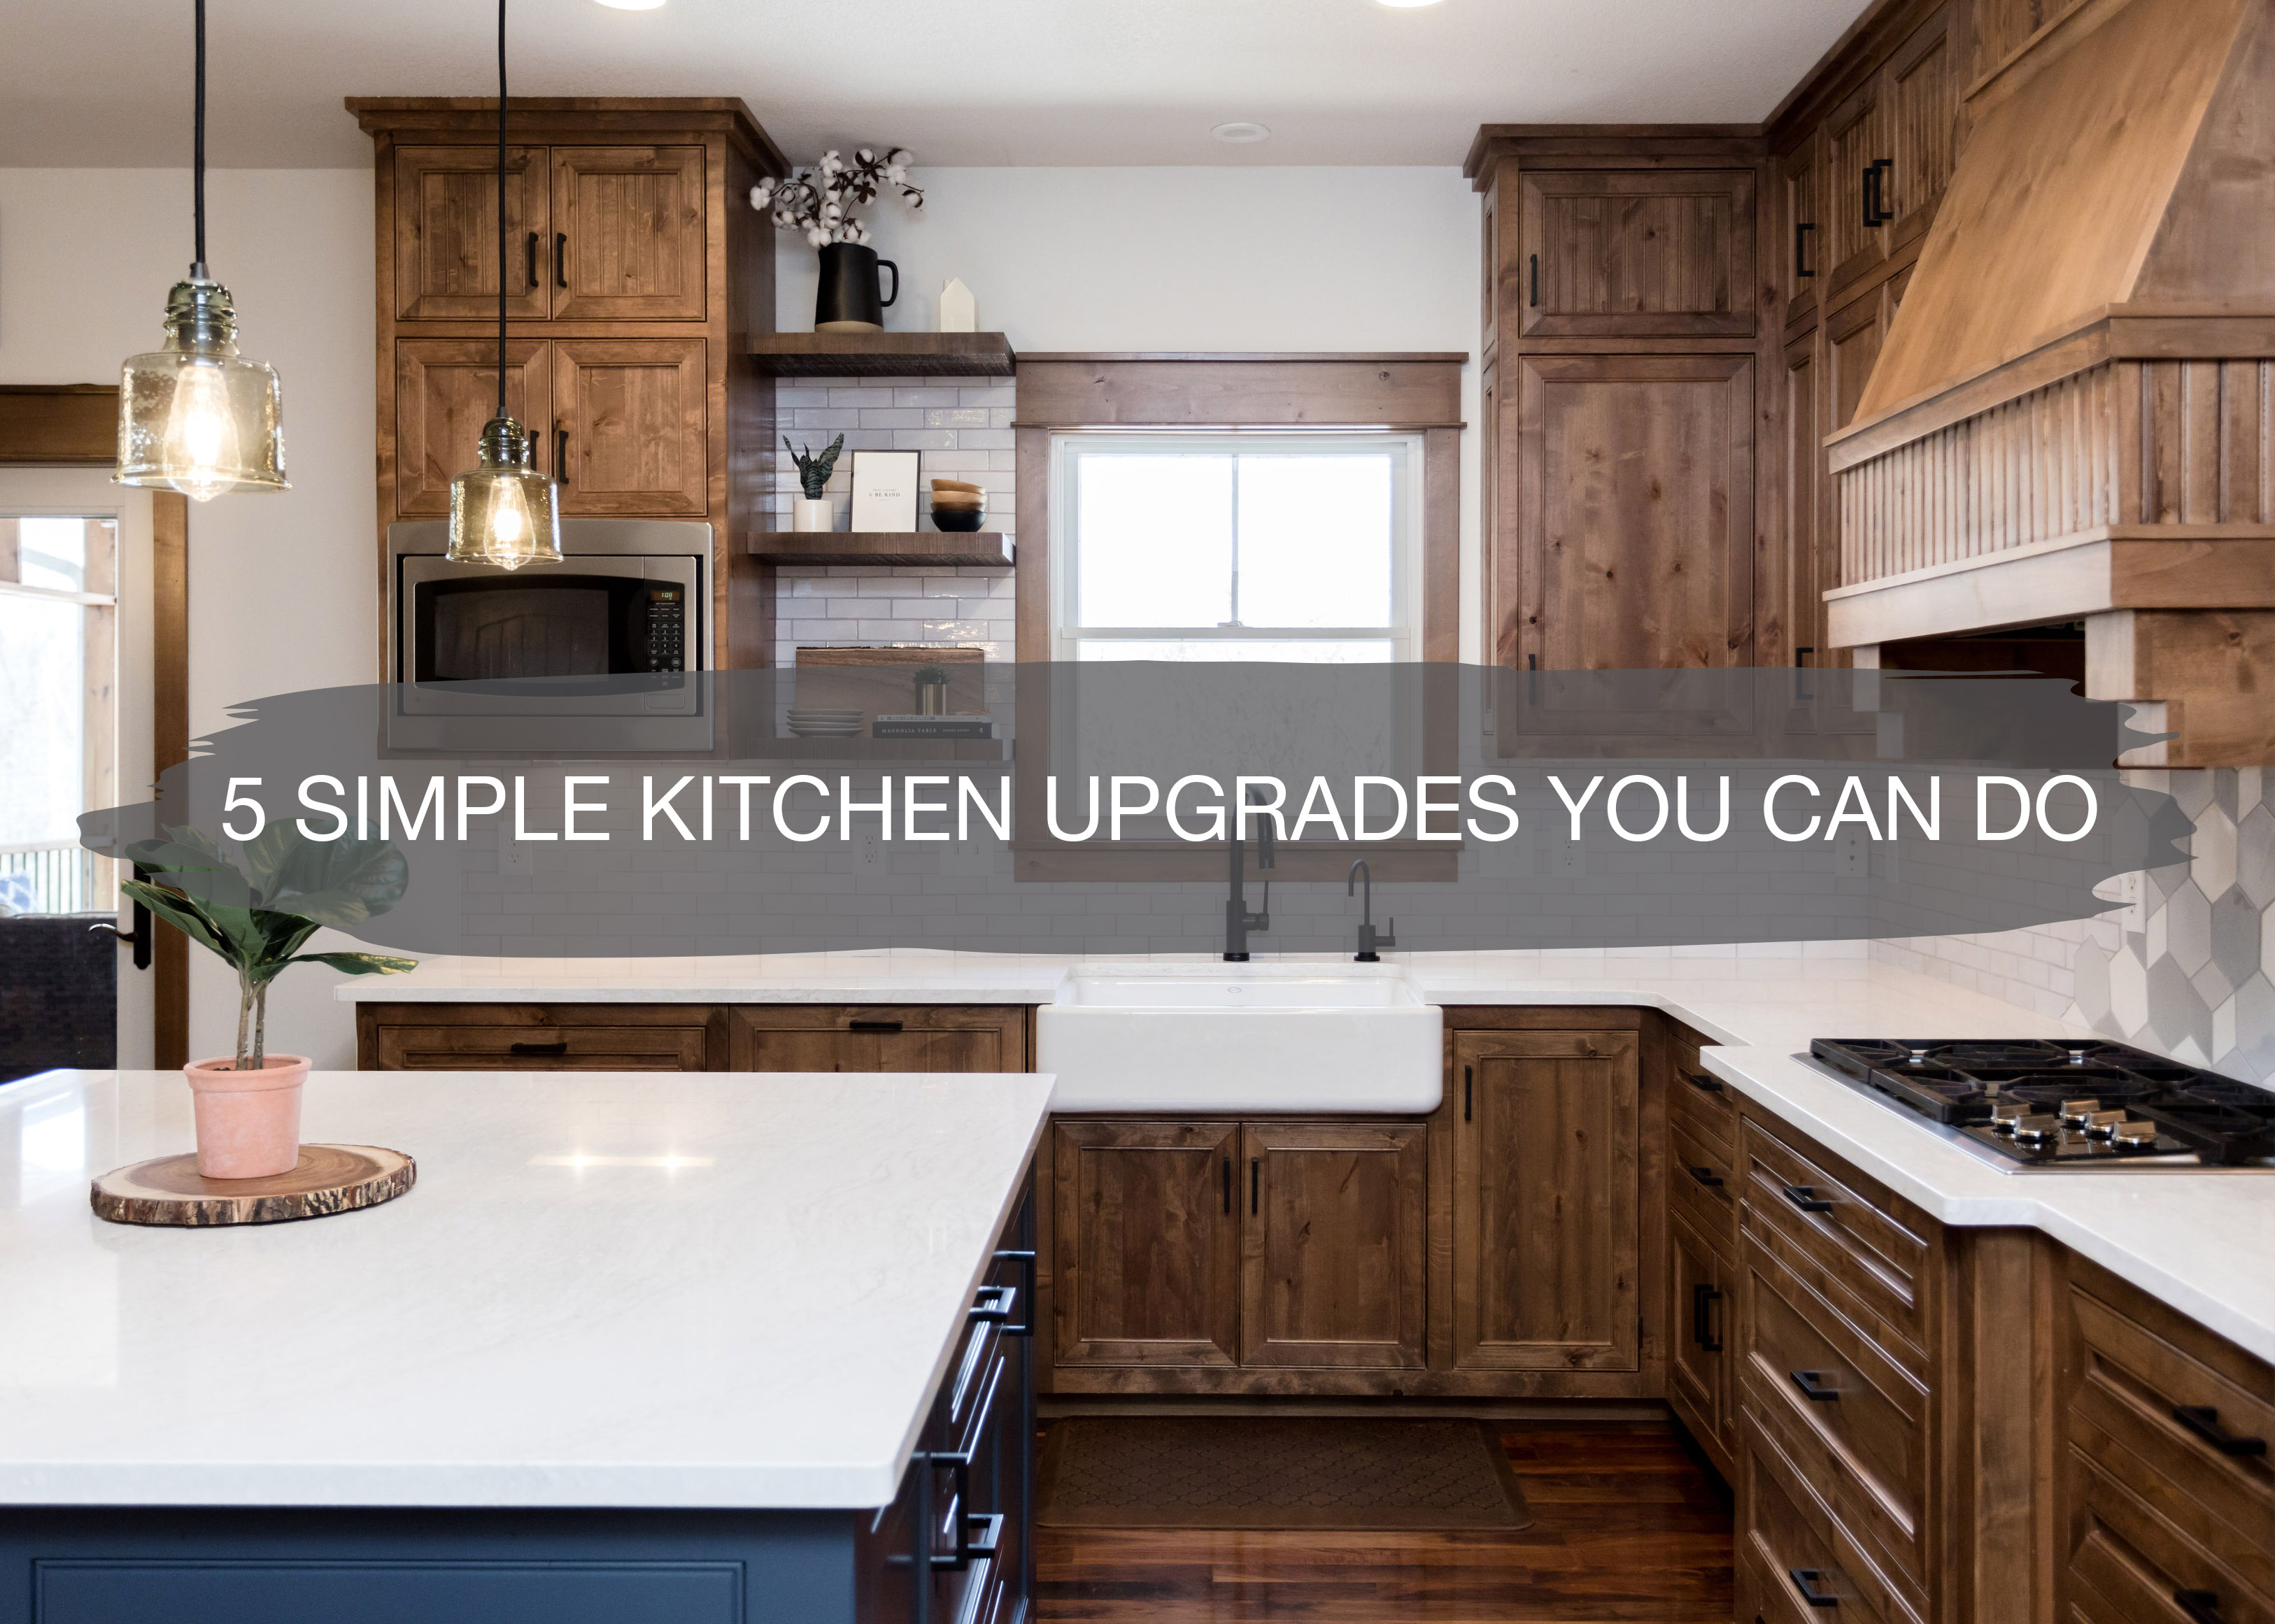 5 Simple Kitchen Upgrades You Can Do | construction2style